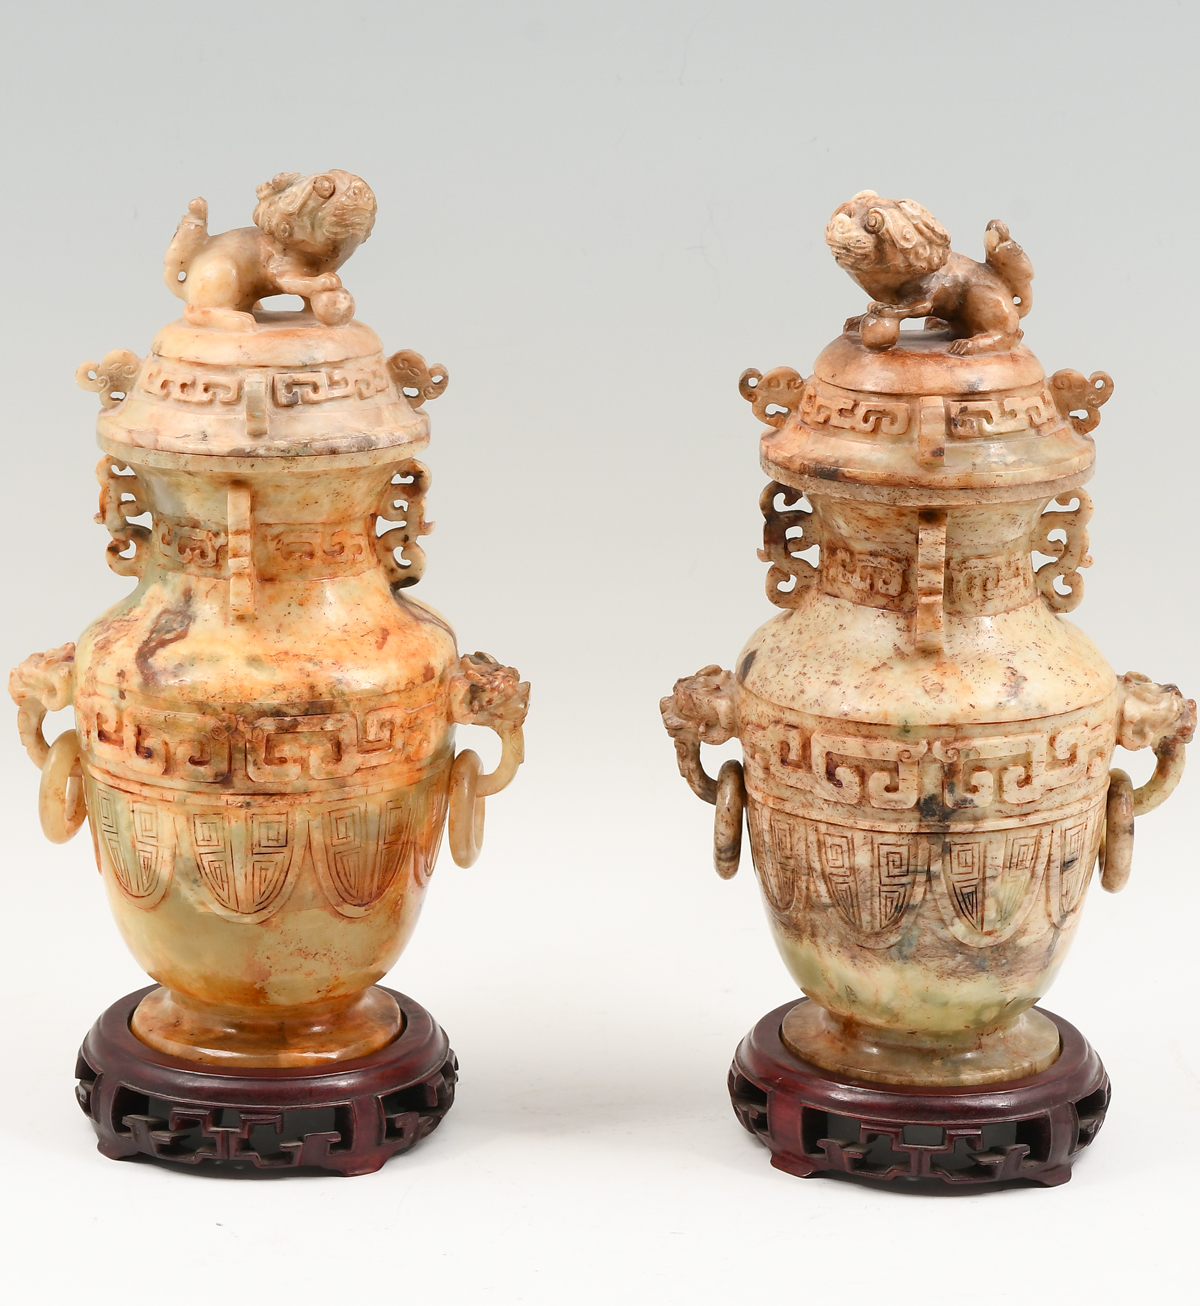 PAIR CHINESE CARVED SOAPSTONE VESSELS: